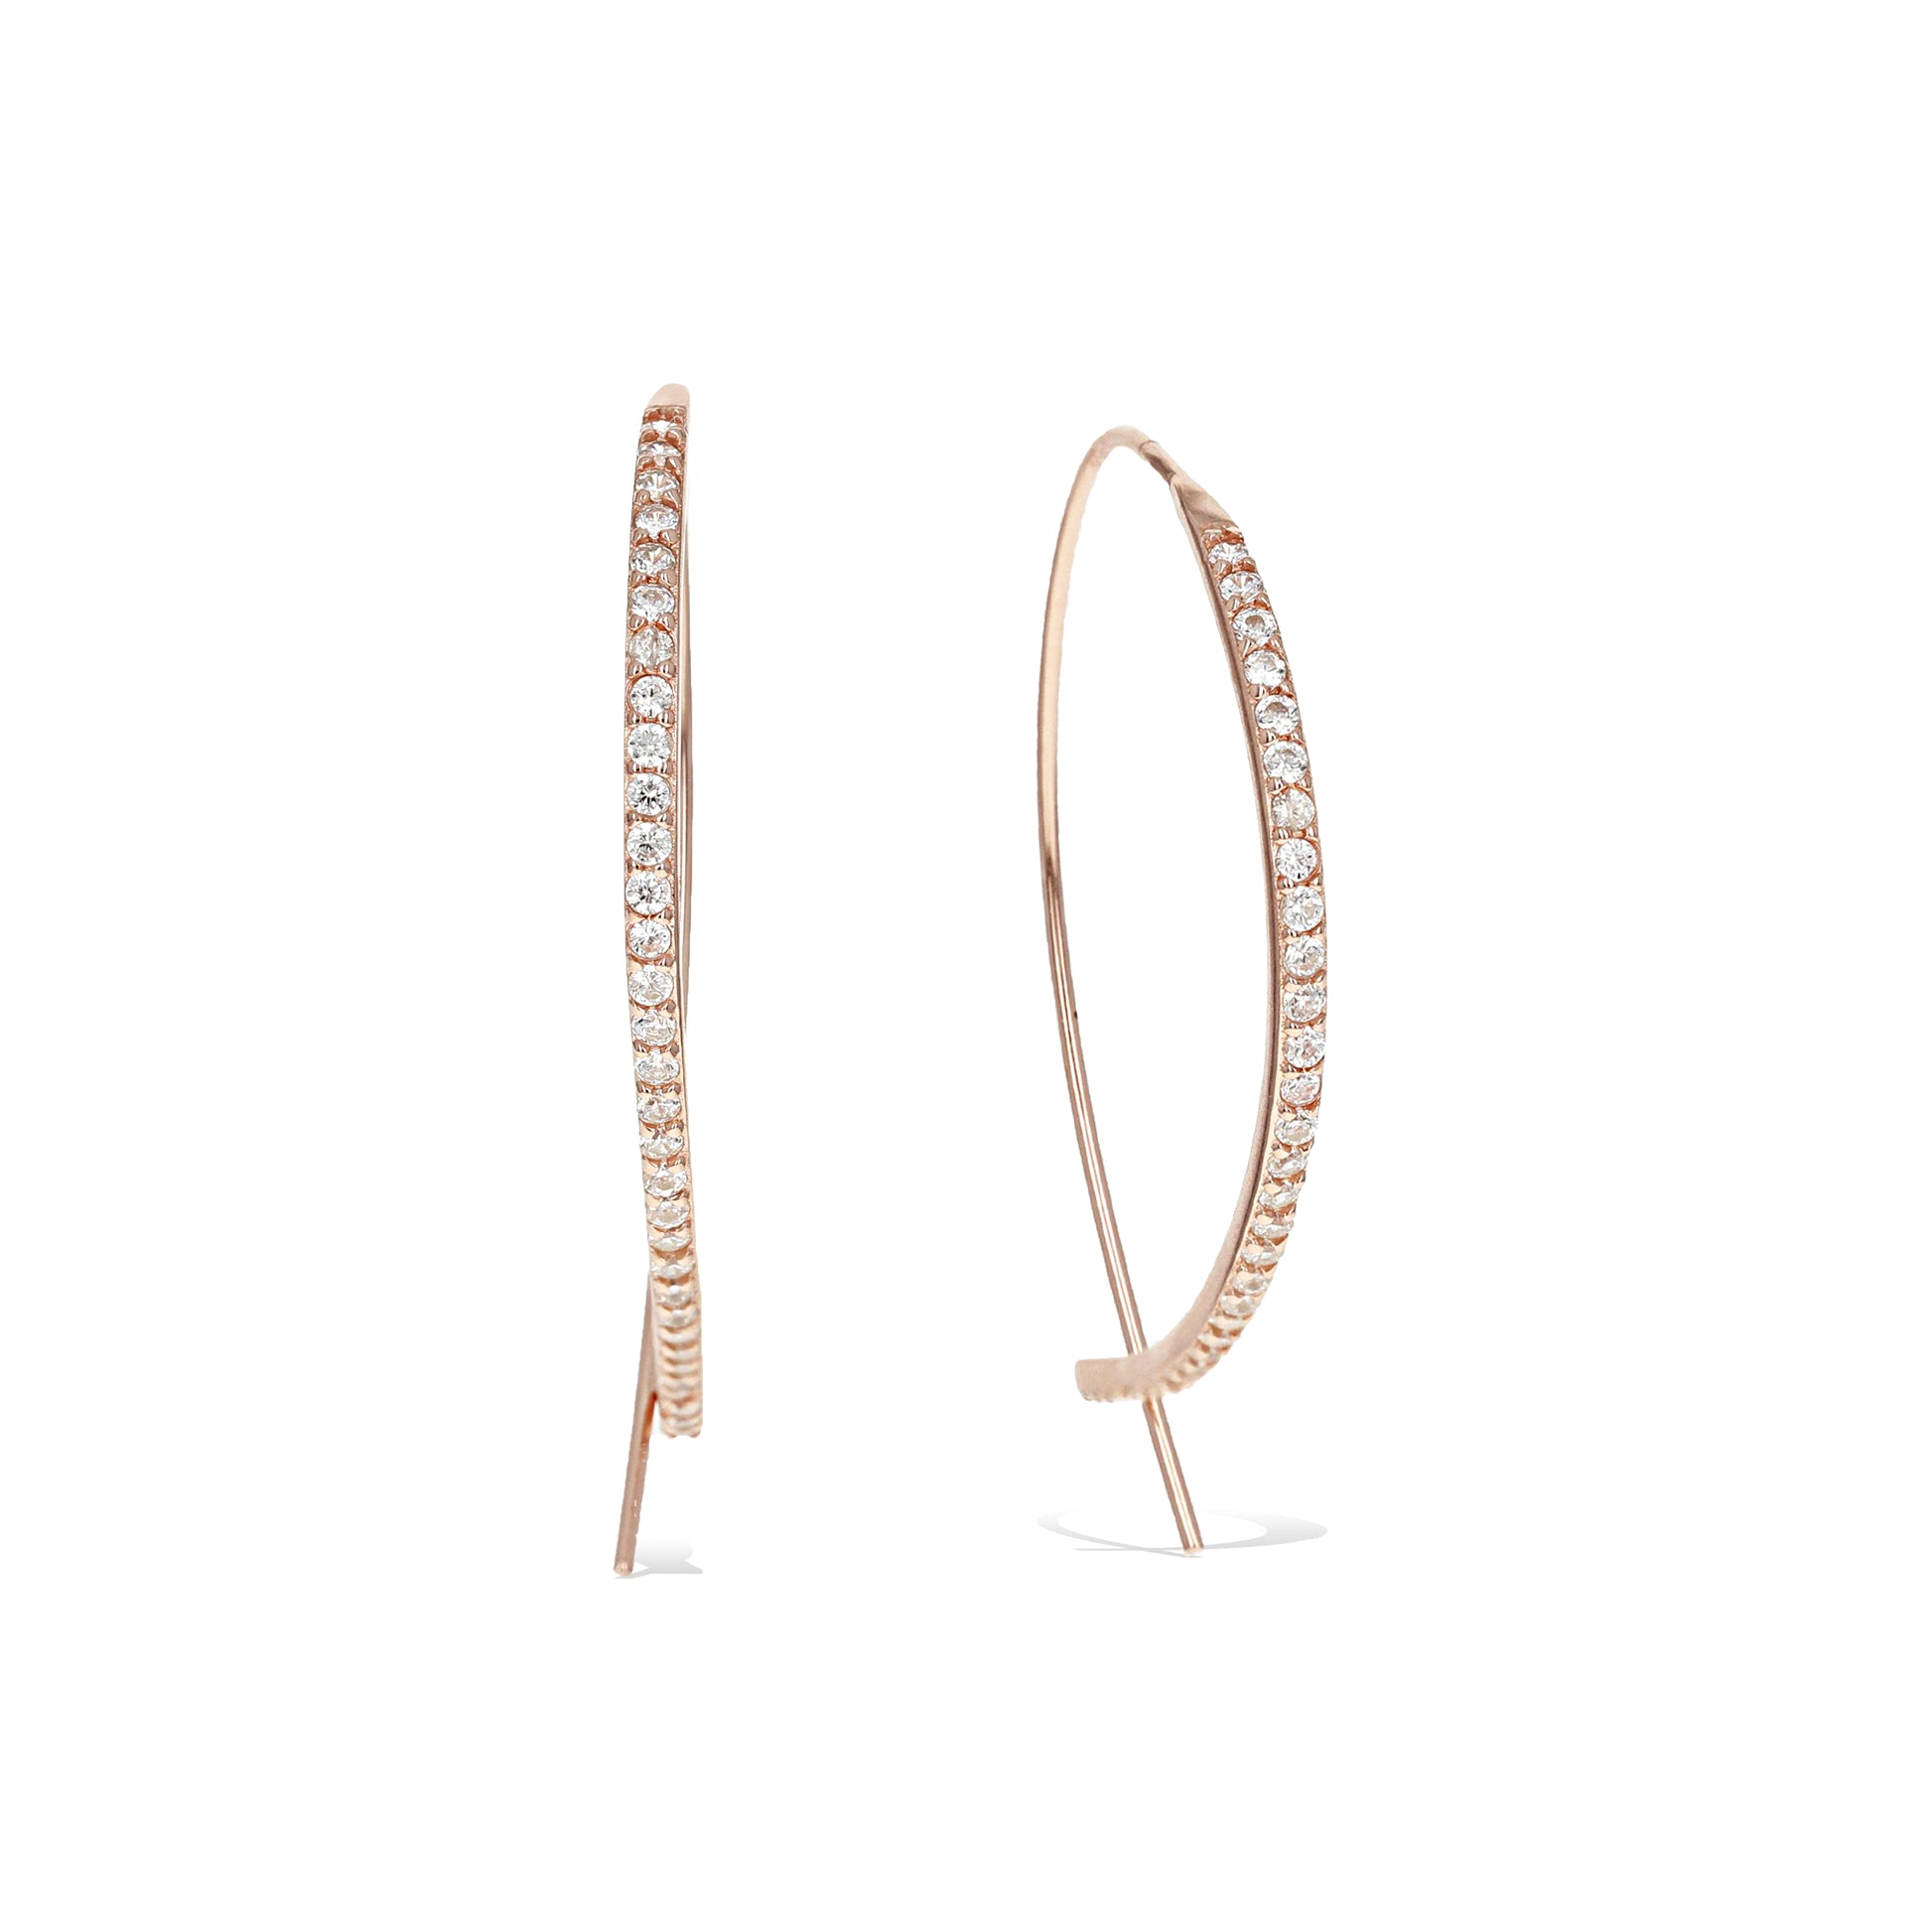 Rose gold thread-through hoop earrings with pave' cubic zirconia stones